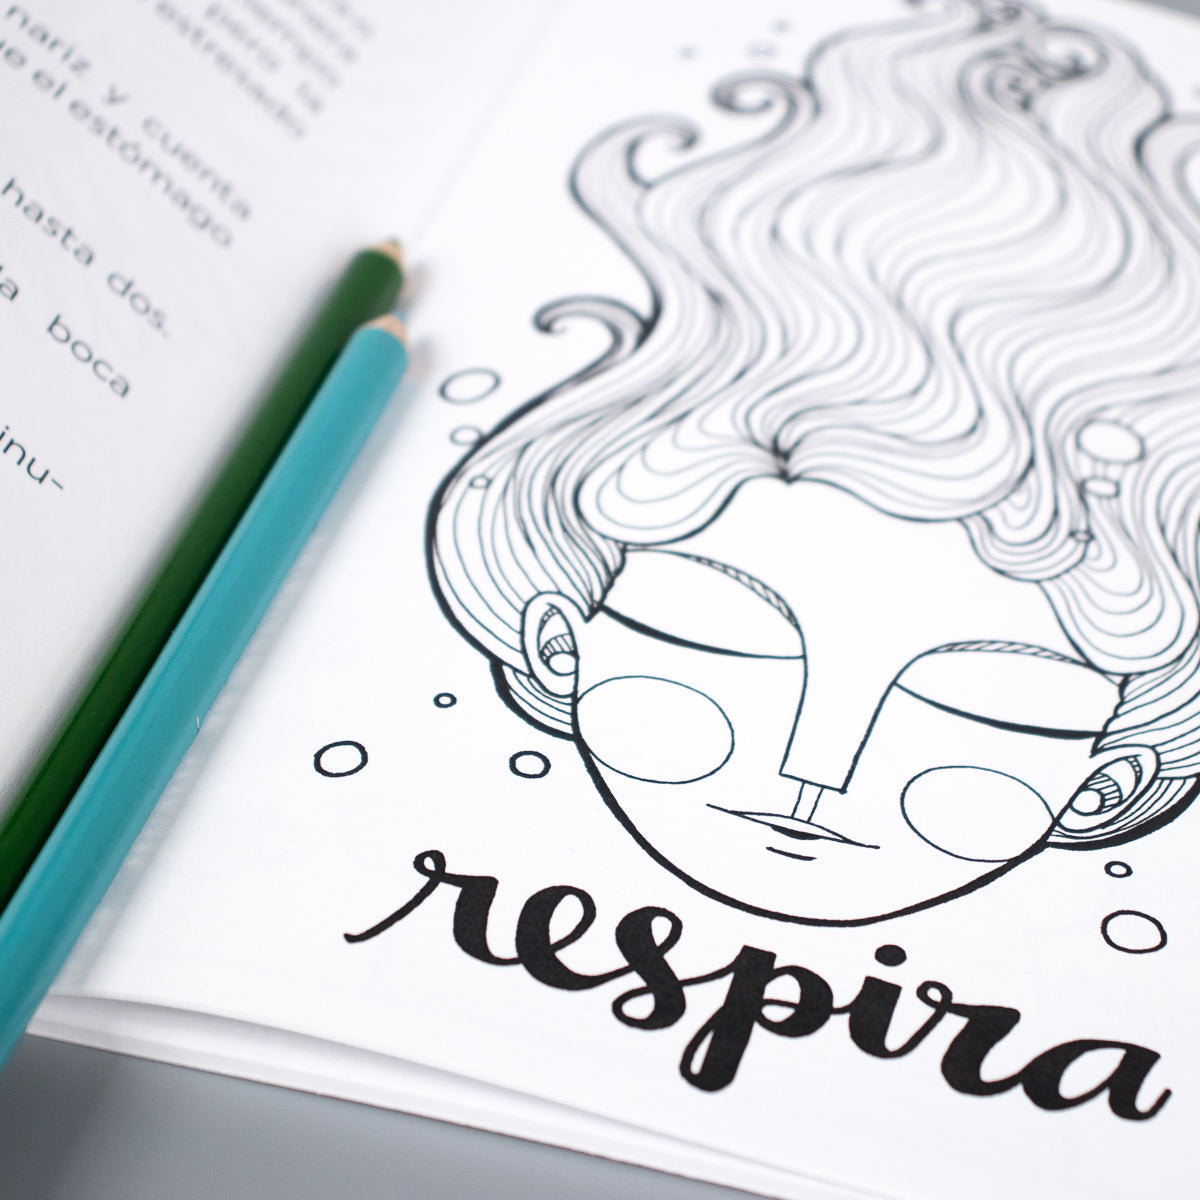 A page inside of Artisticamente Valiente shows a woman's face with her eyes closed and the word "respira" which means "breathe".